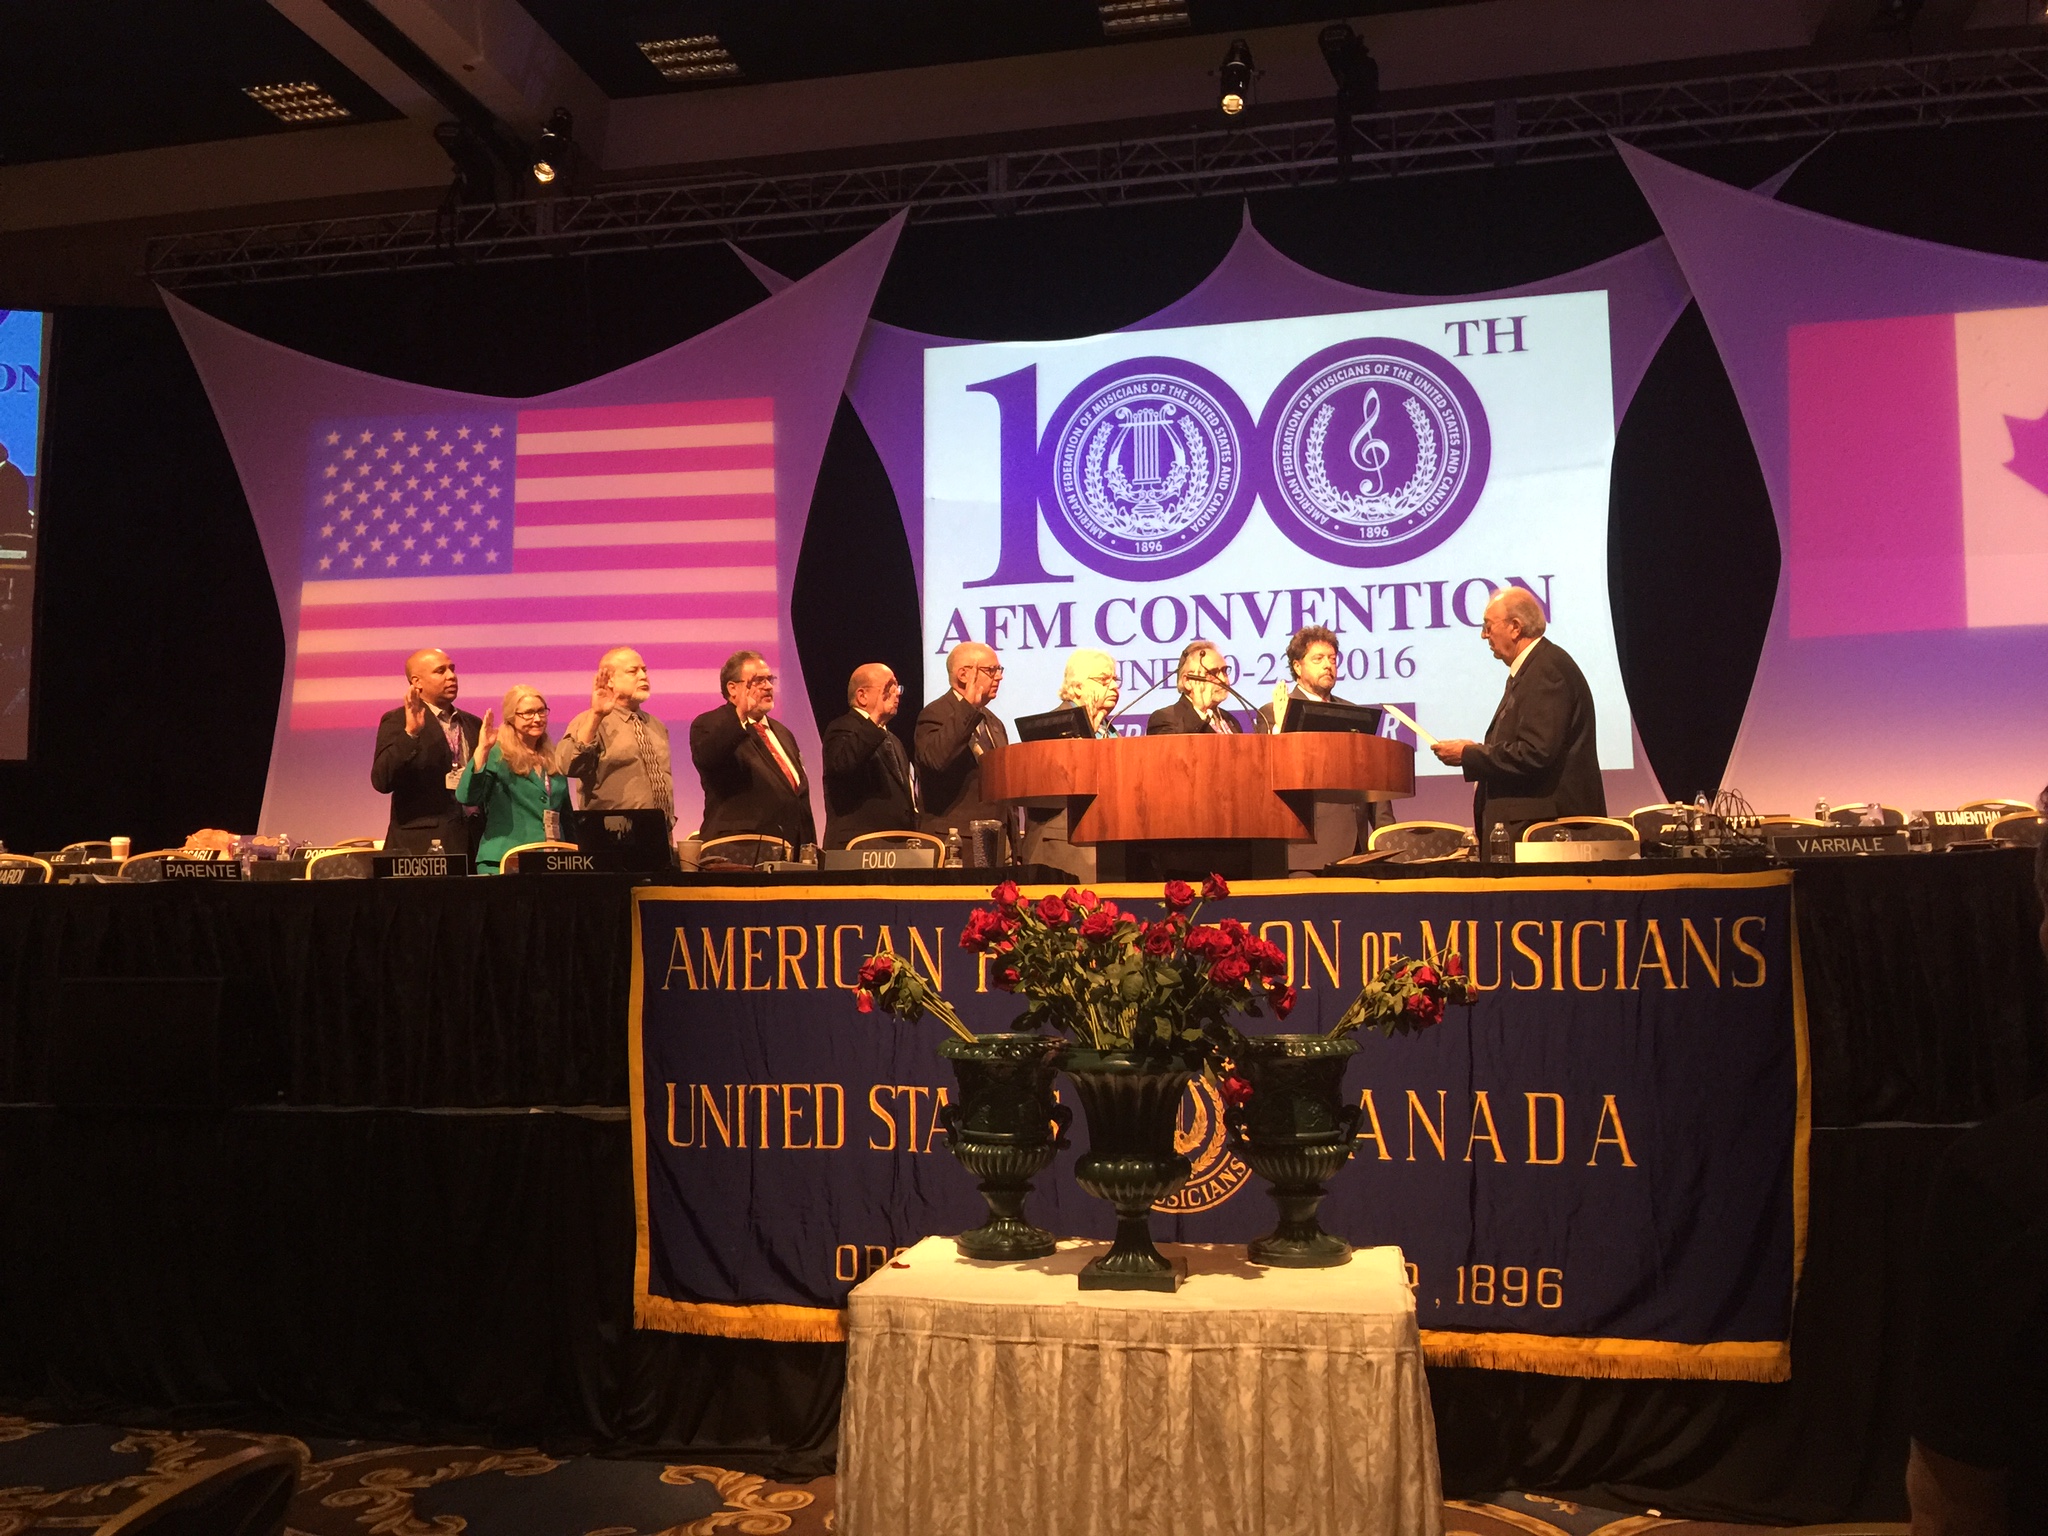 The new AFM International Executive Board members - including our own President John Acosta - being sworn in at the 100th Convention. (Photo: Bonnie Janofsky)